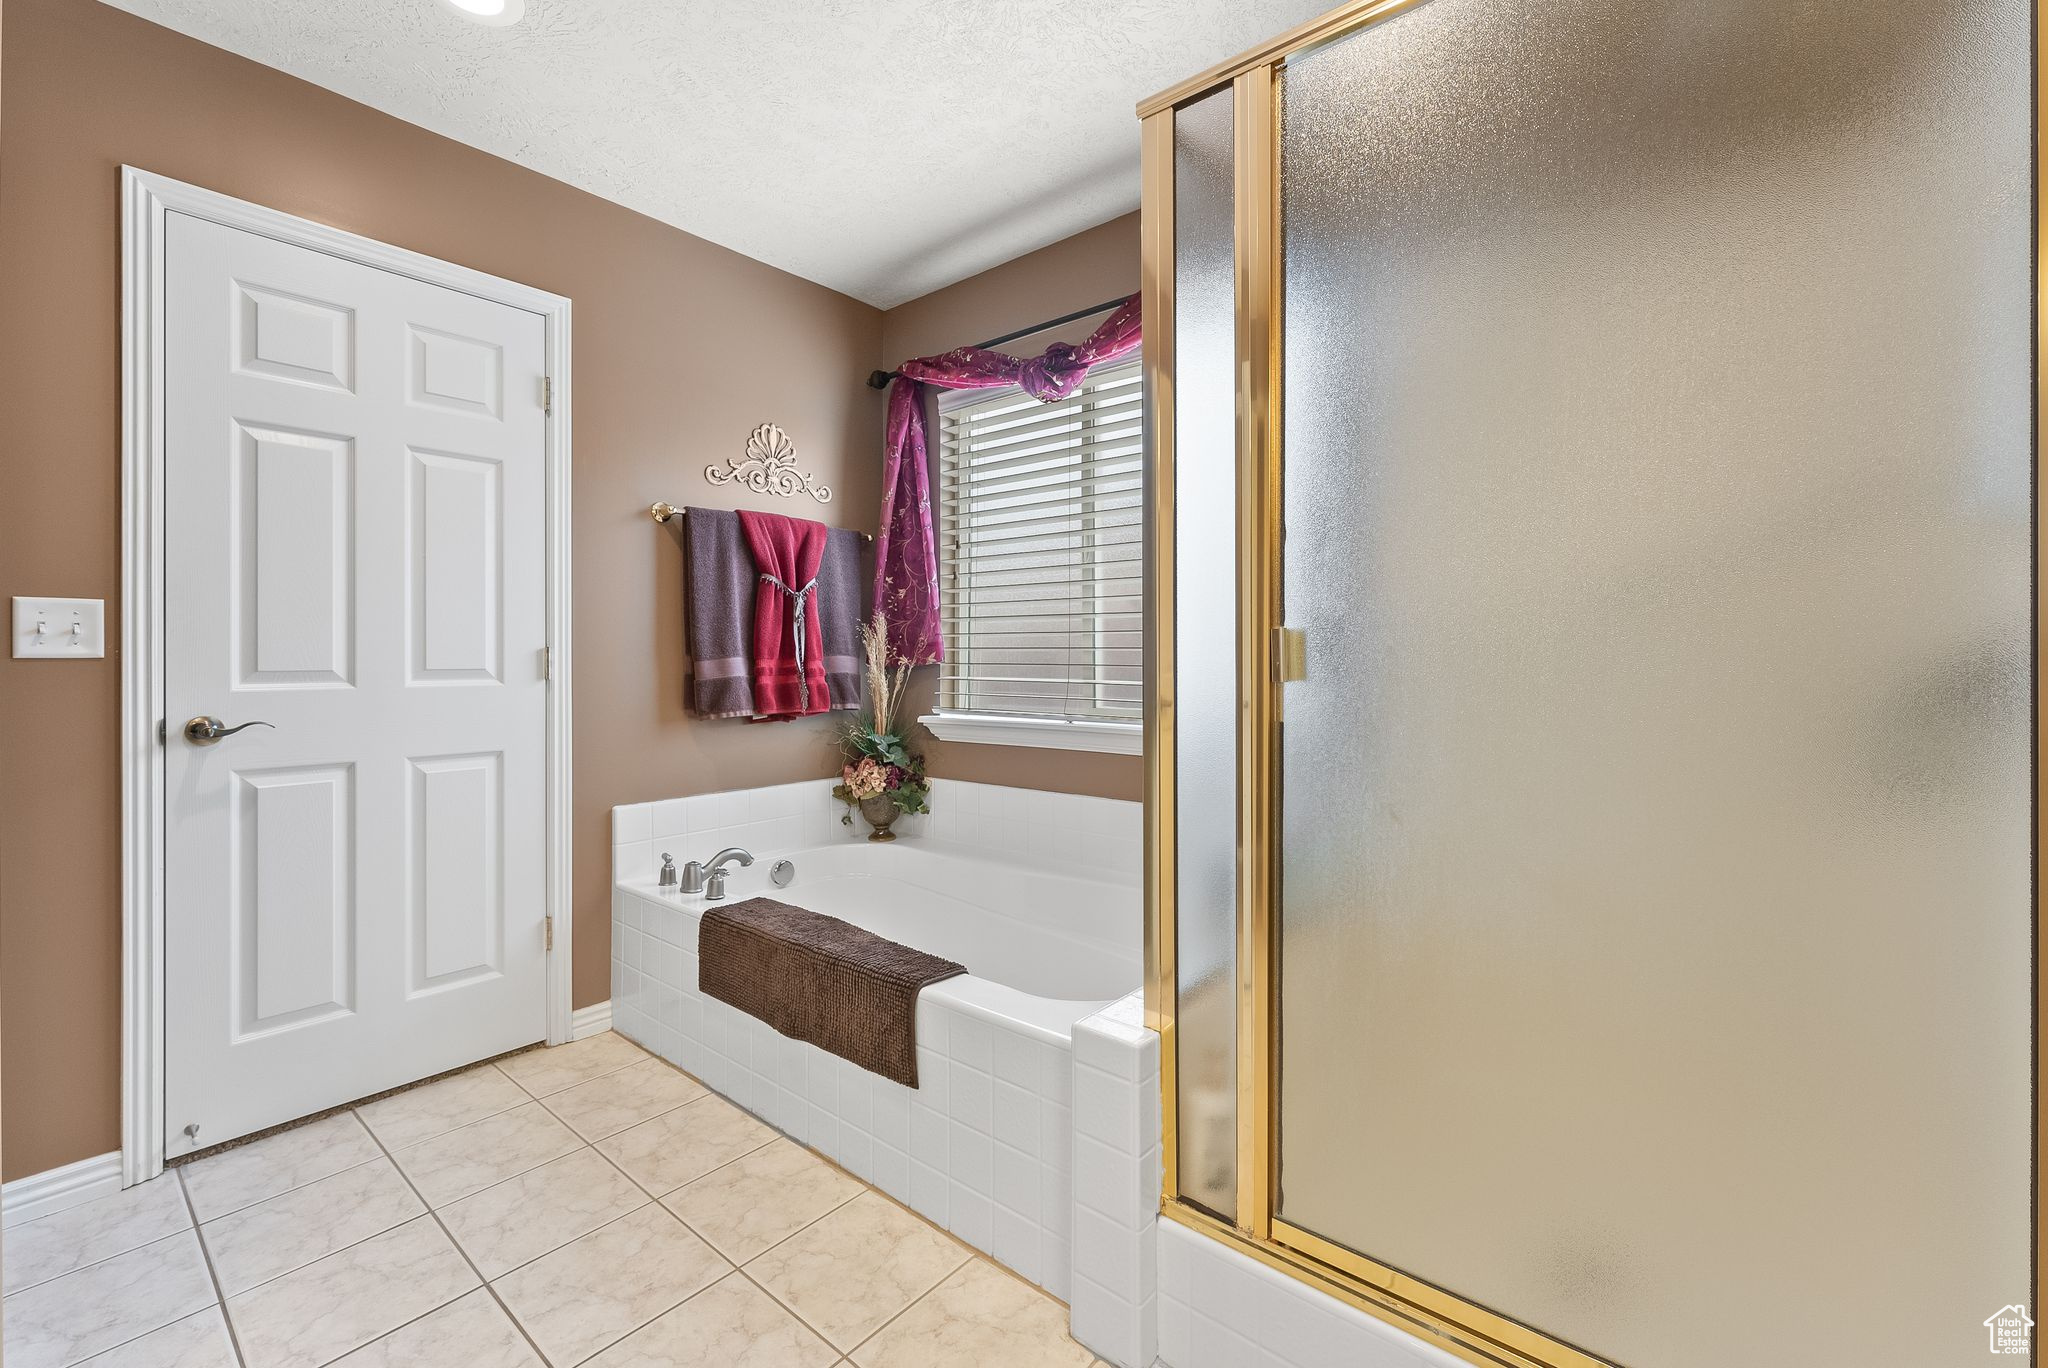 Bathroom with a textured ceiling, separate shower and tub, and tile flooring